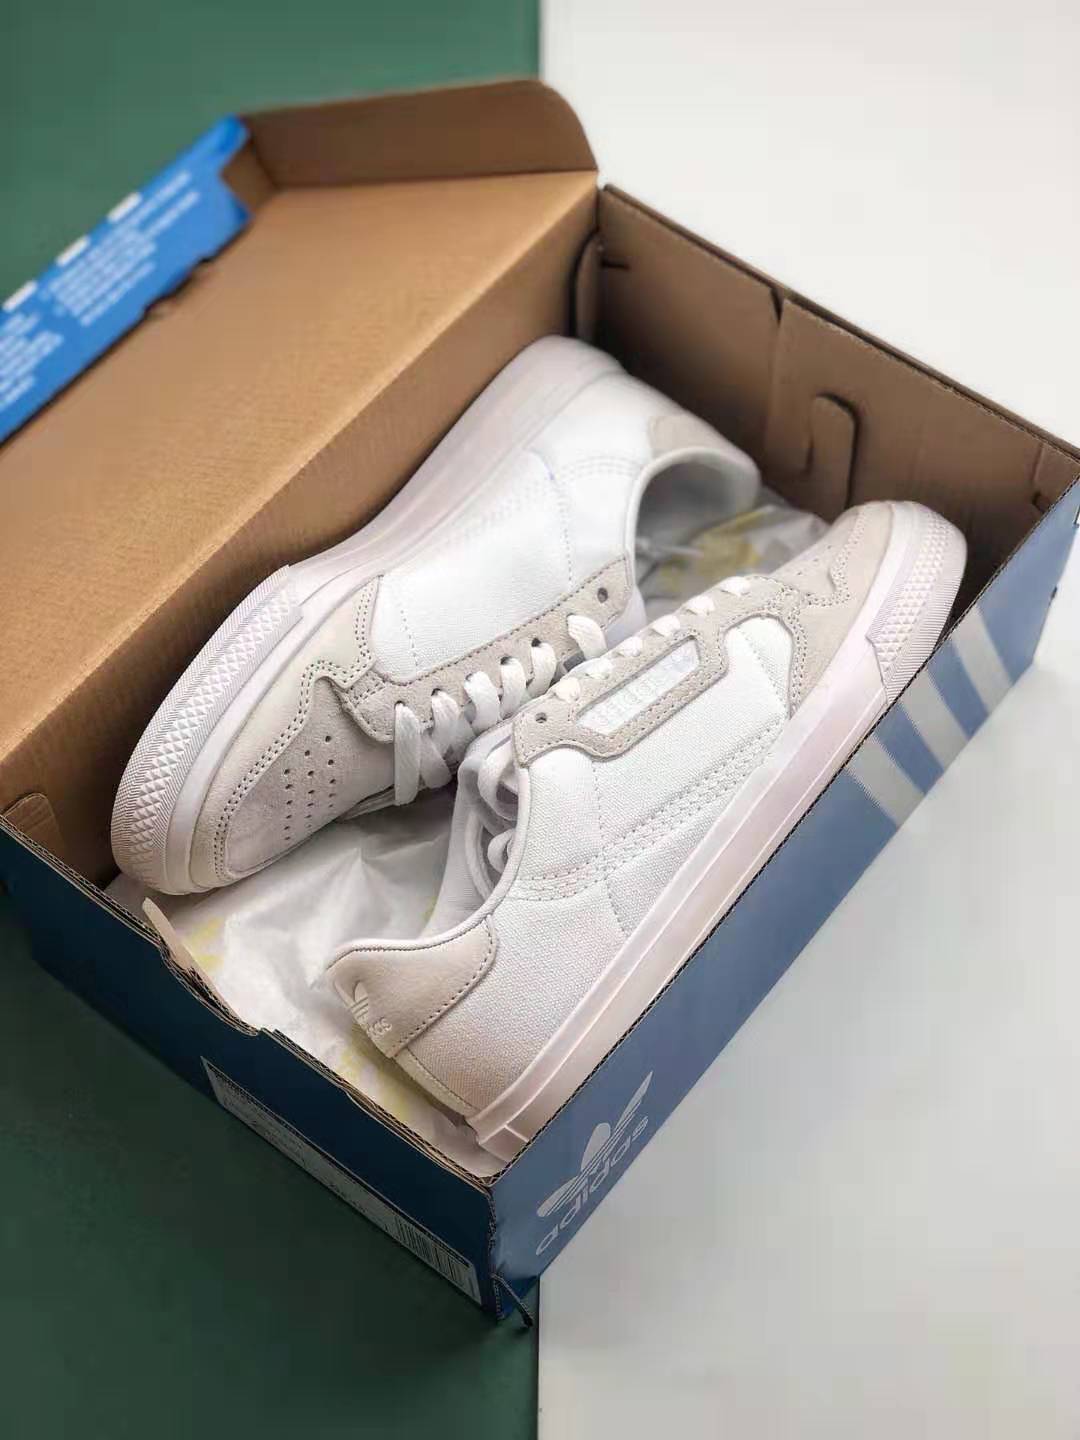 Adidas Continental Vulc Triple White EF3523 - Classic and Clean Sneakers